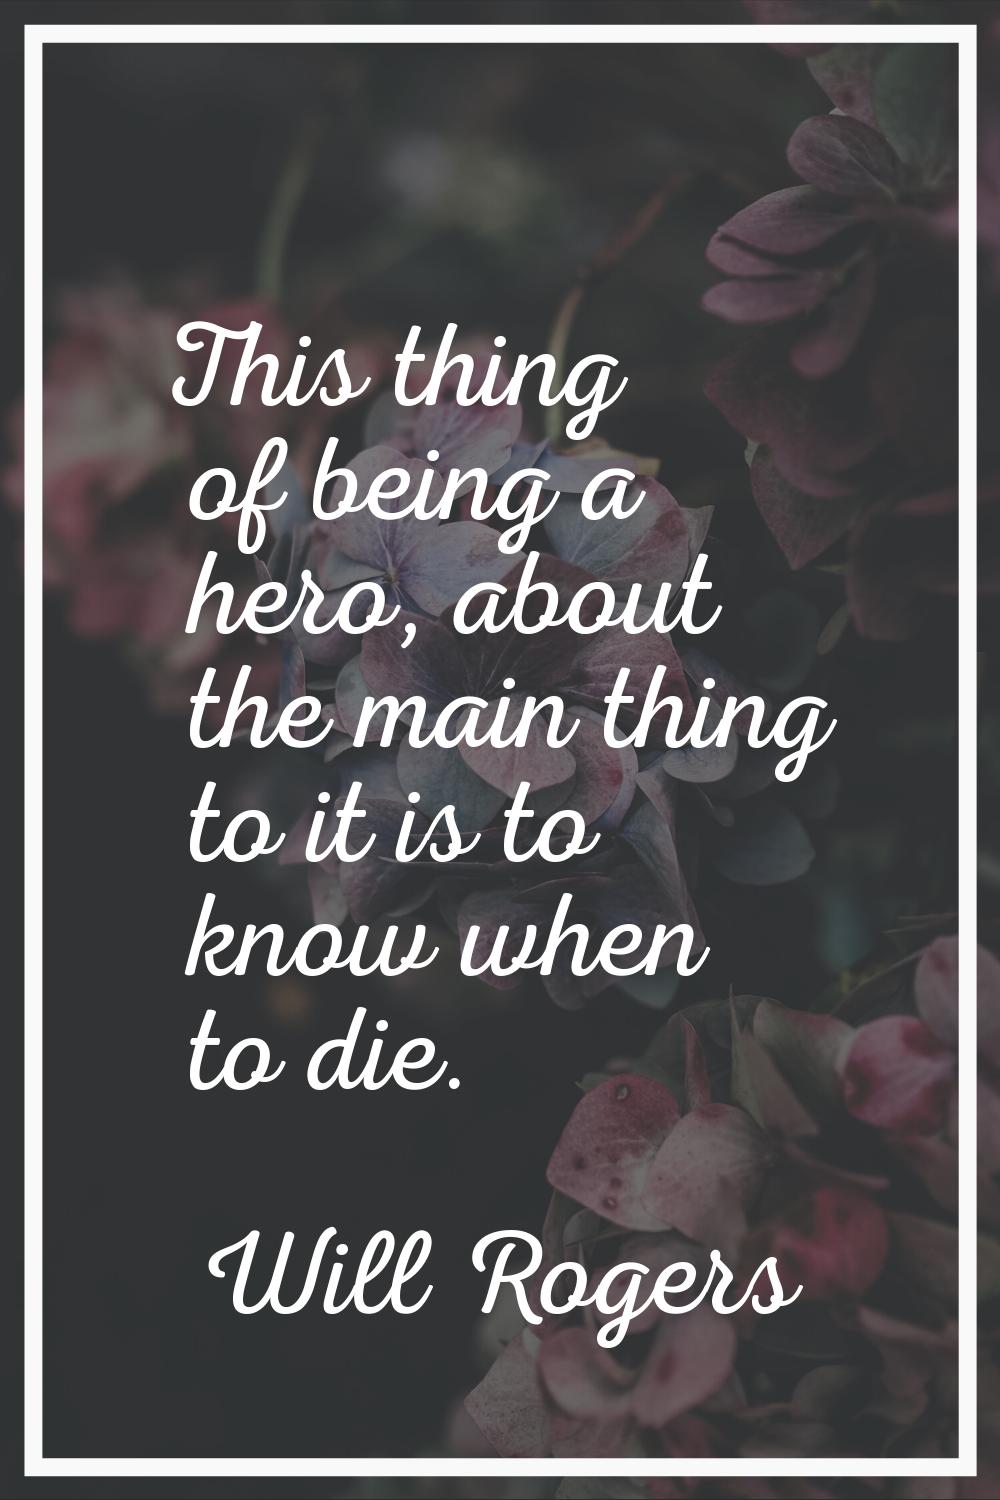 This thing of being a hero, about the main thing to it is to know when to die.